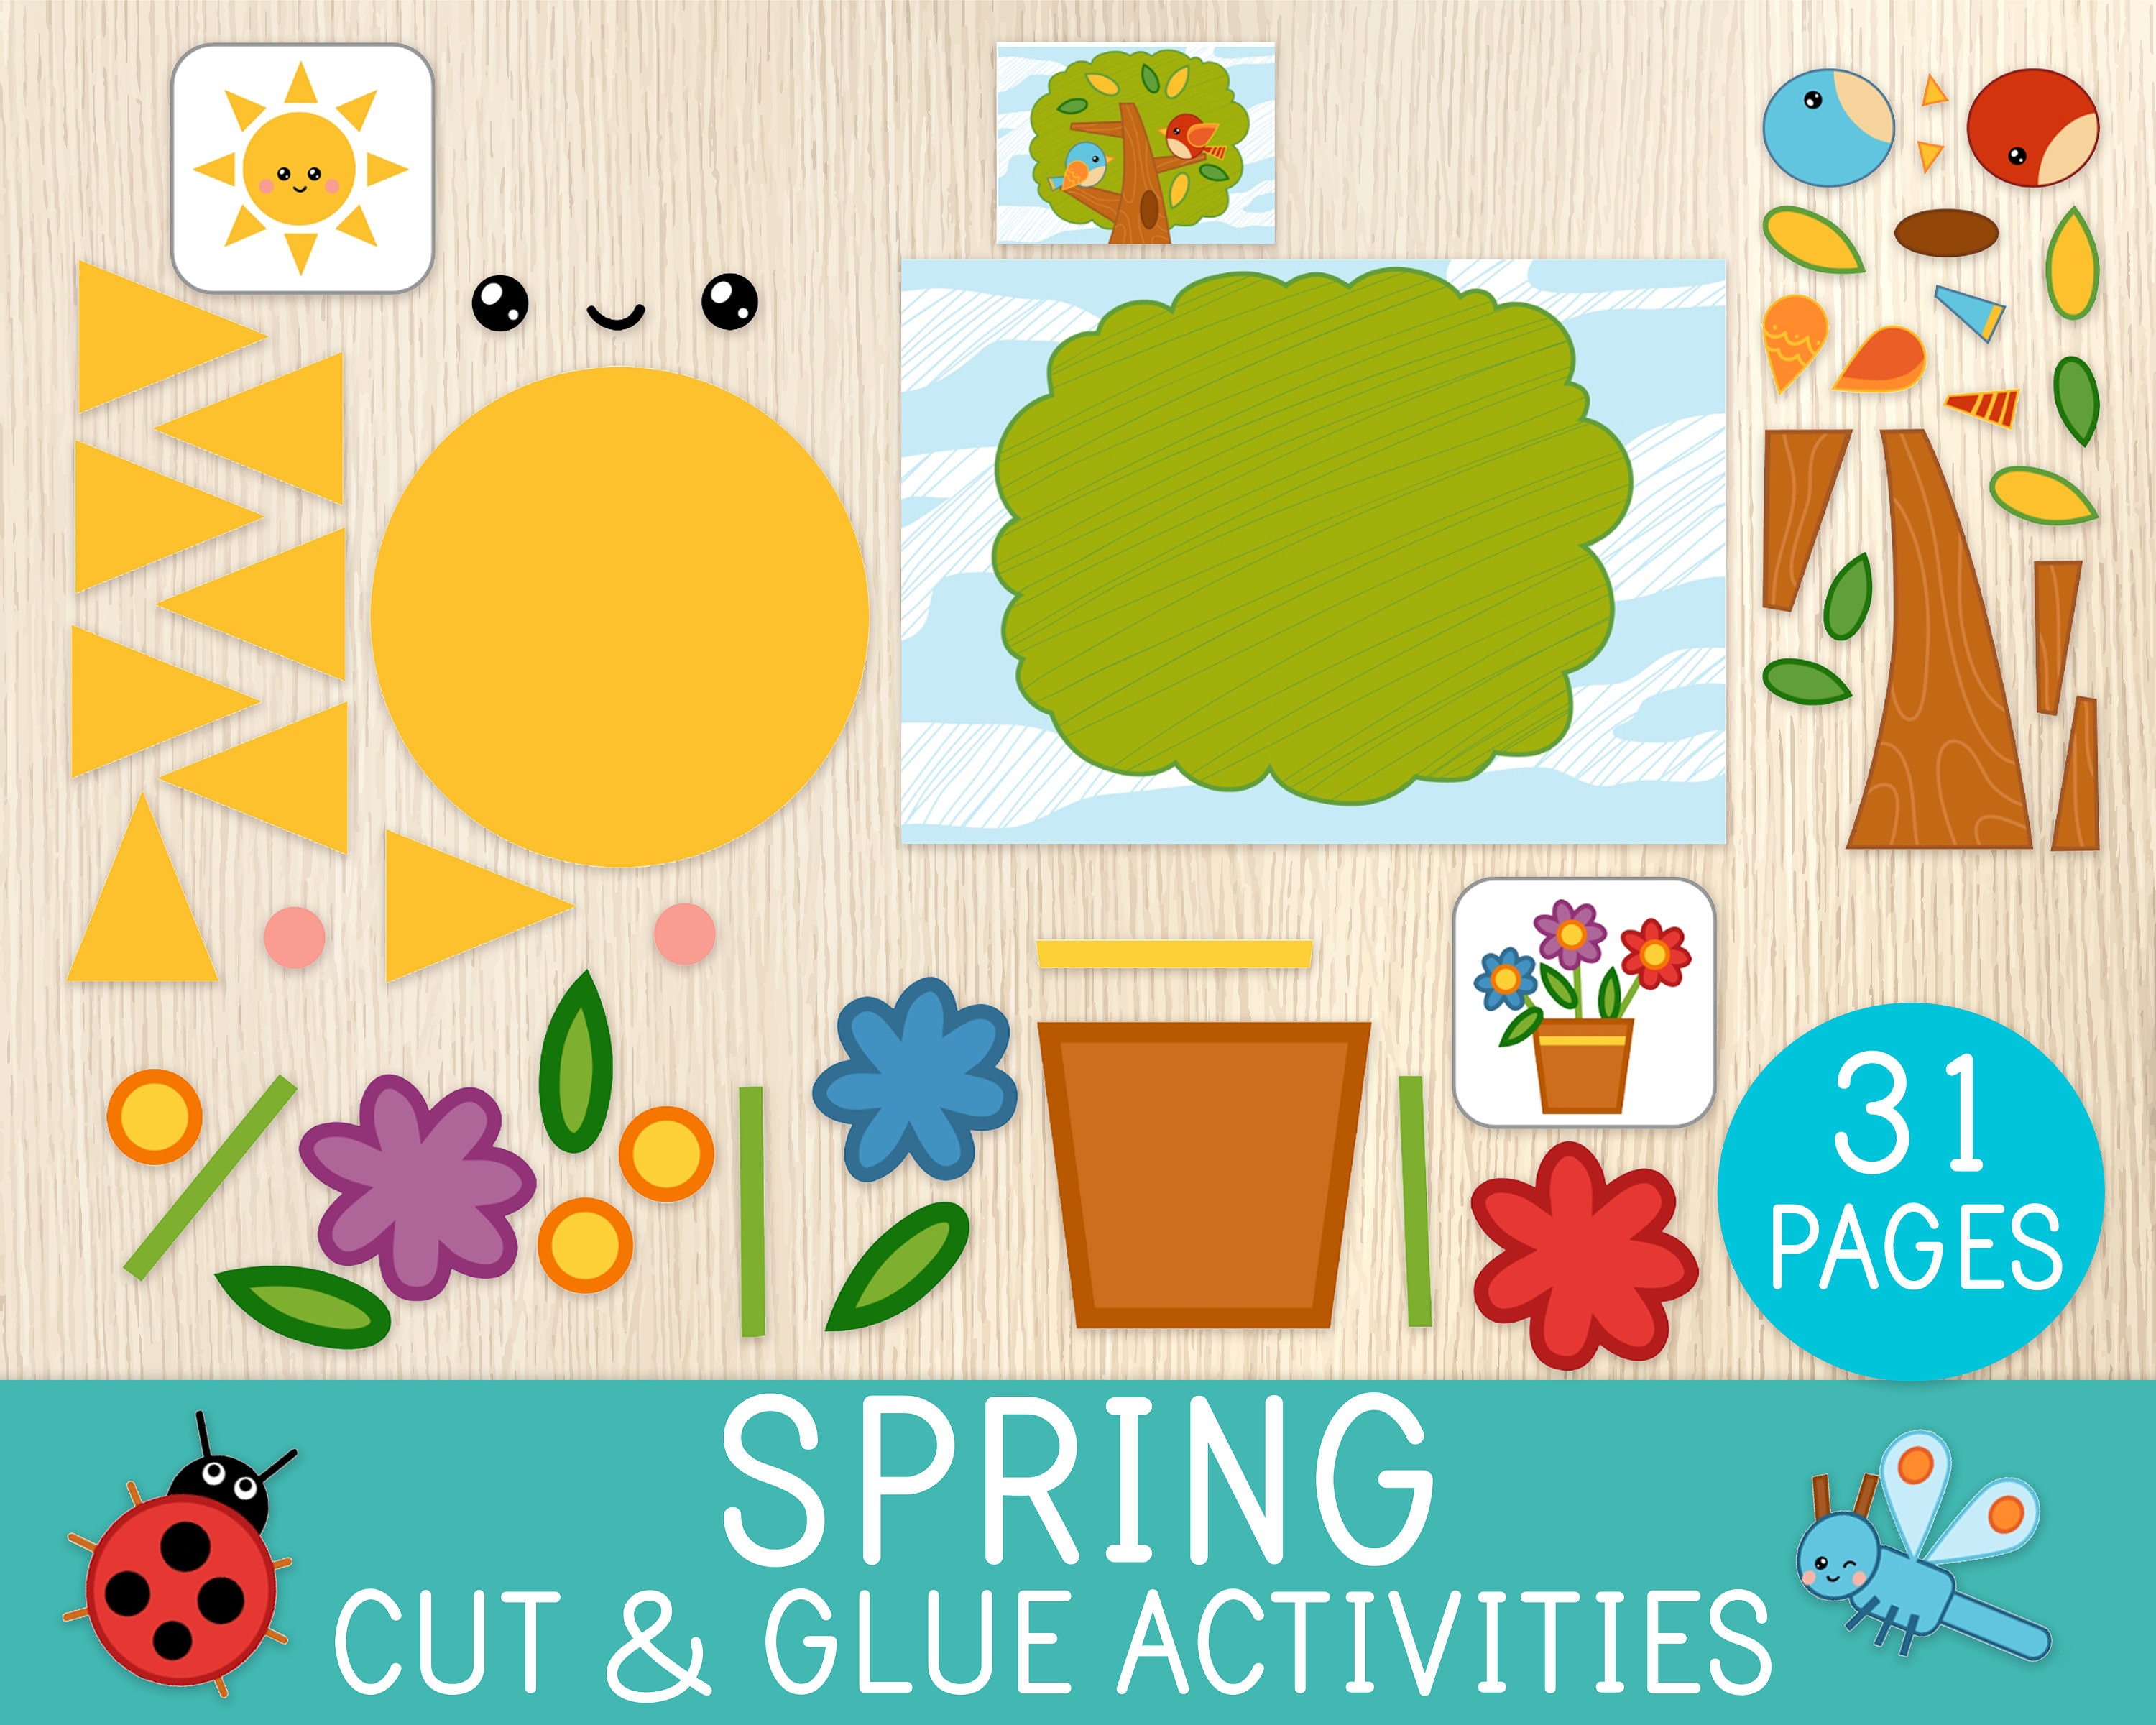 Scissor Skills Practice Spring Cutting Tray - Toddler Approved